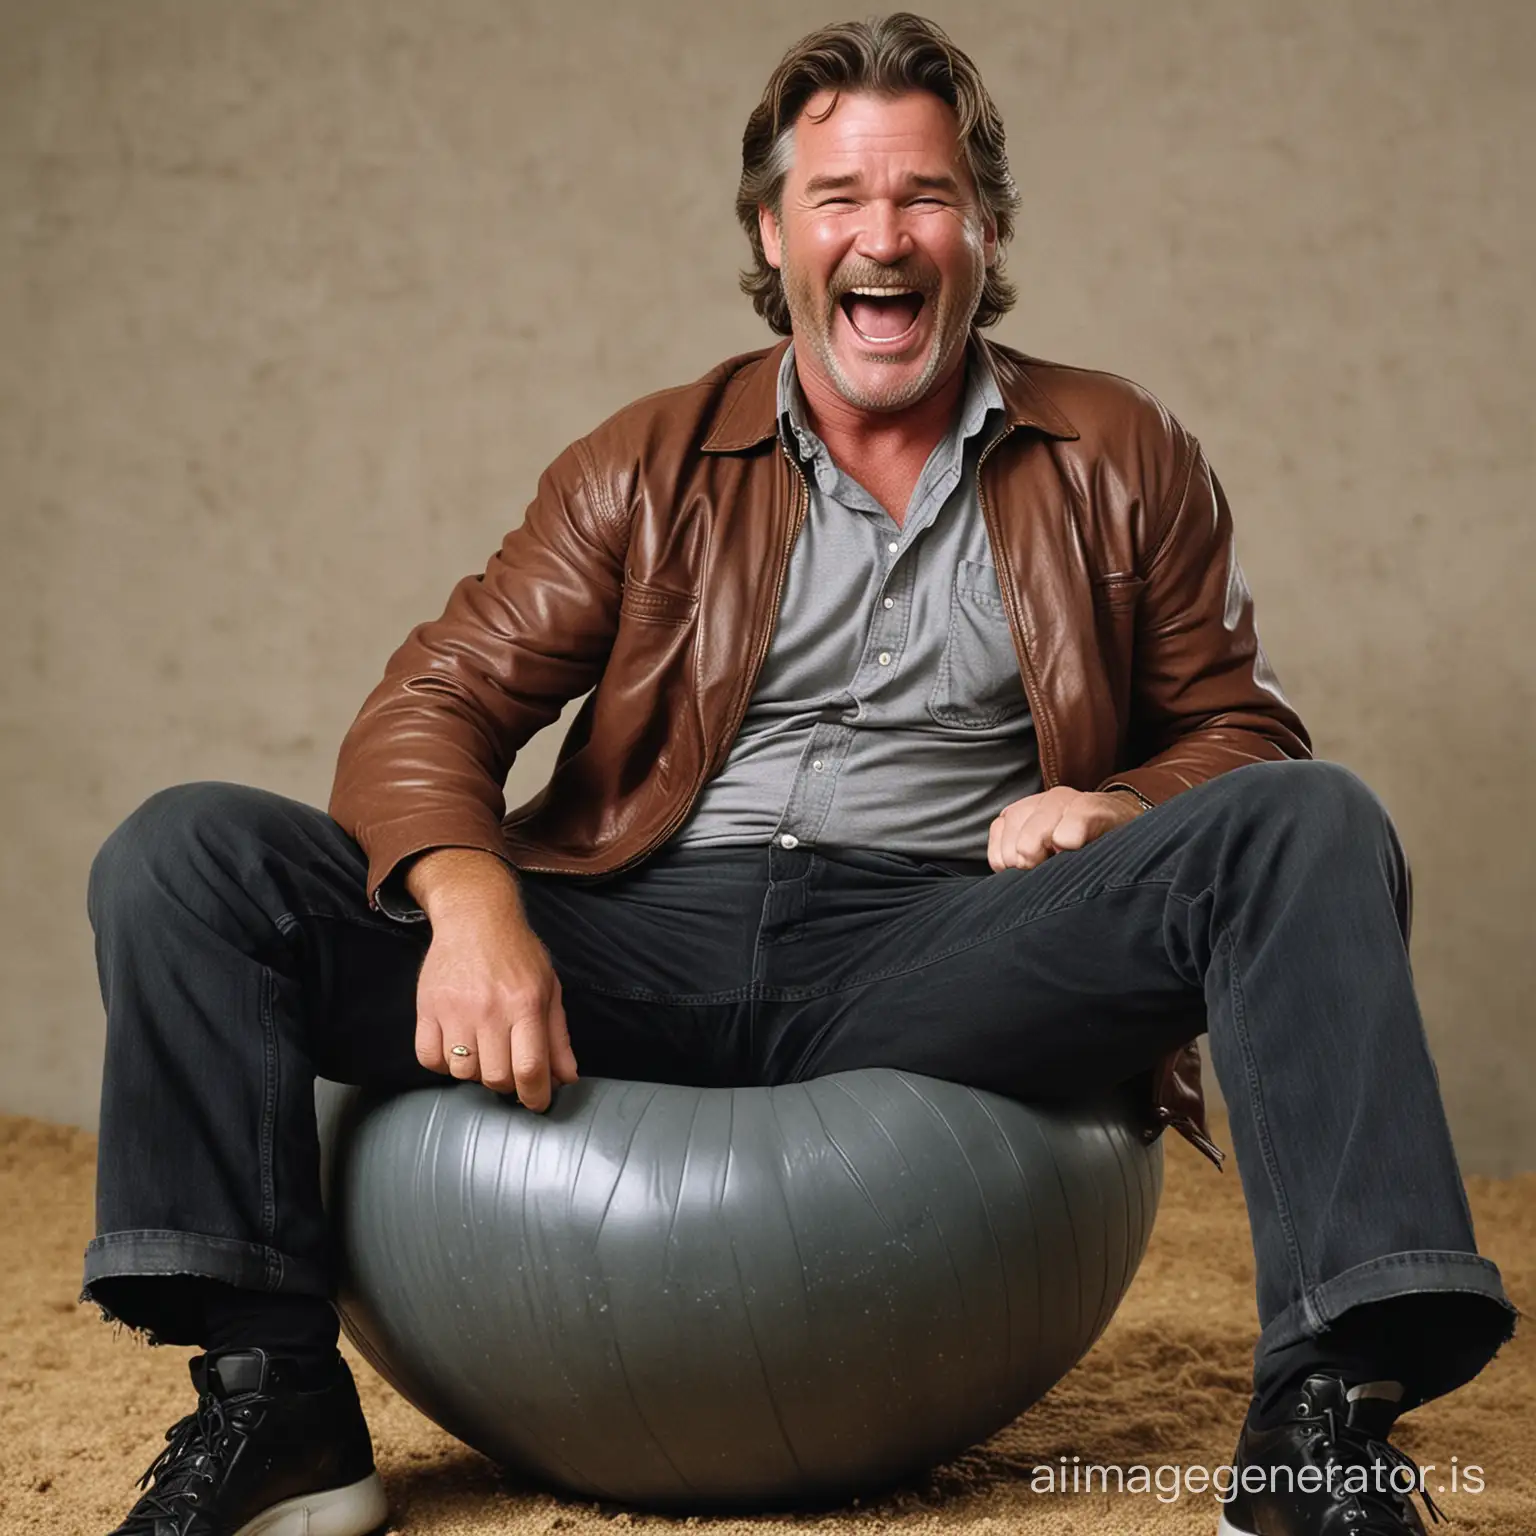 Kurt Russell laughing while sitting on a spacehopper